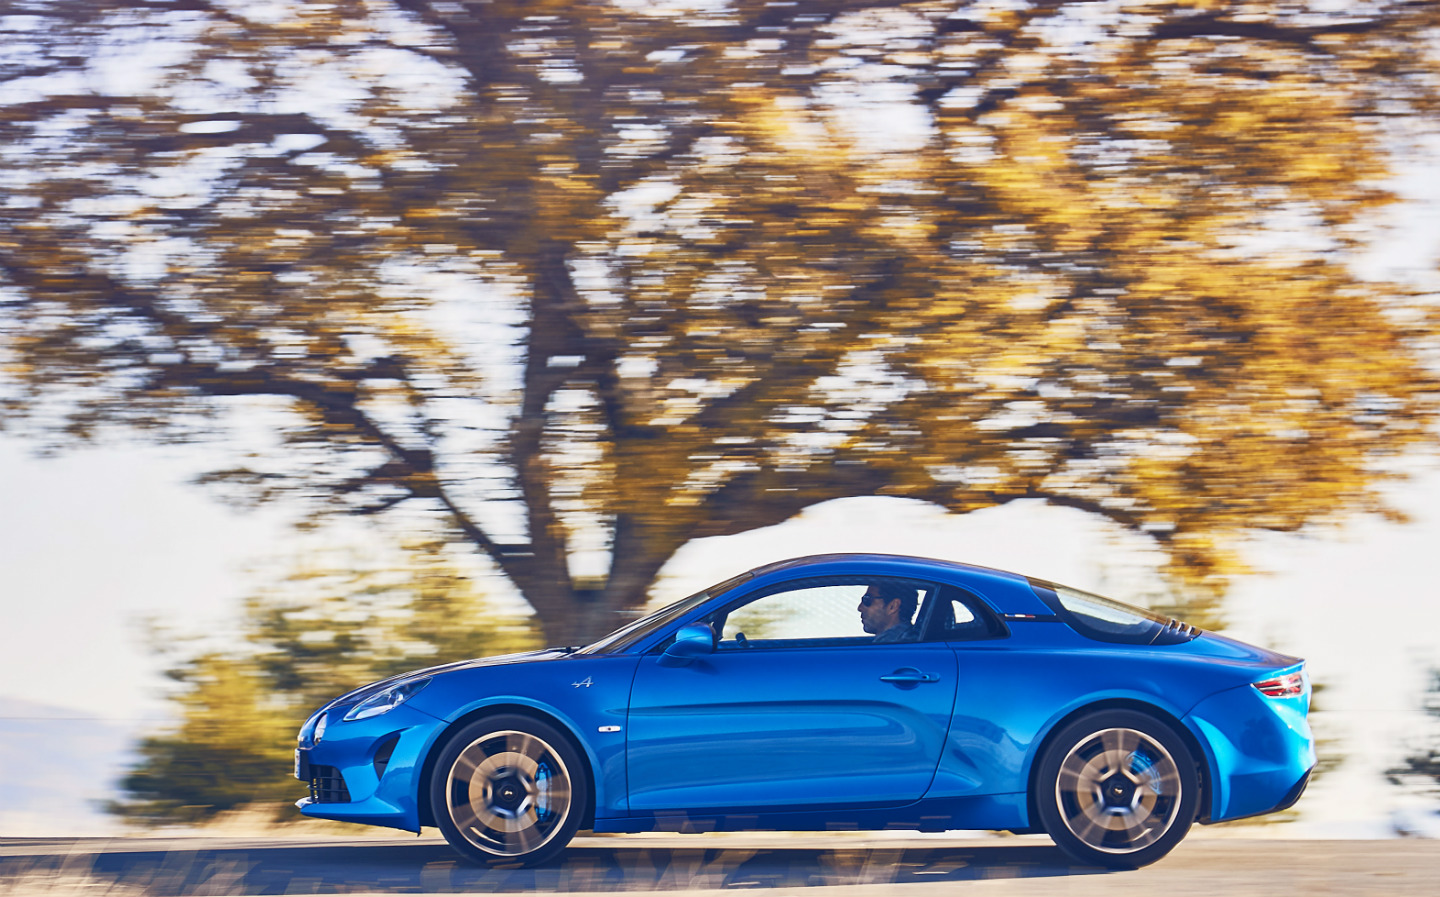 First Drive Review: 2018 Alpine A110